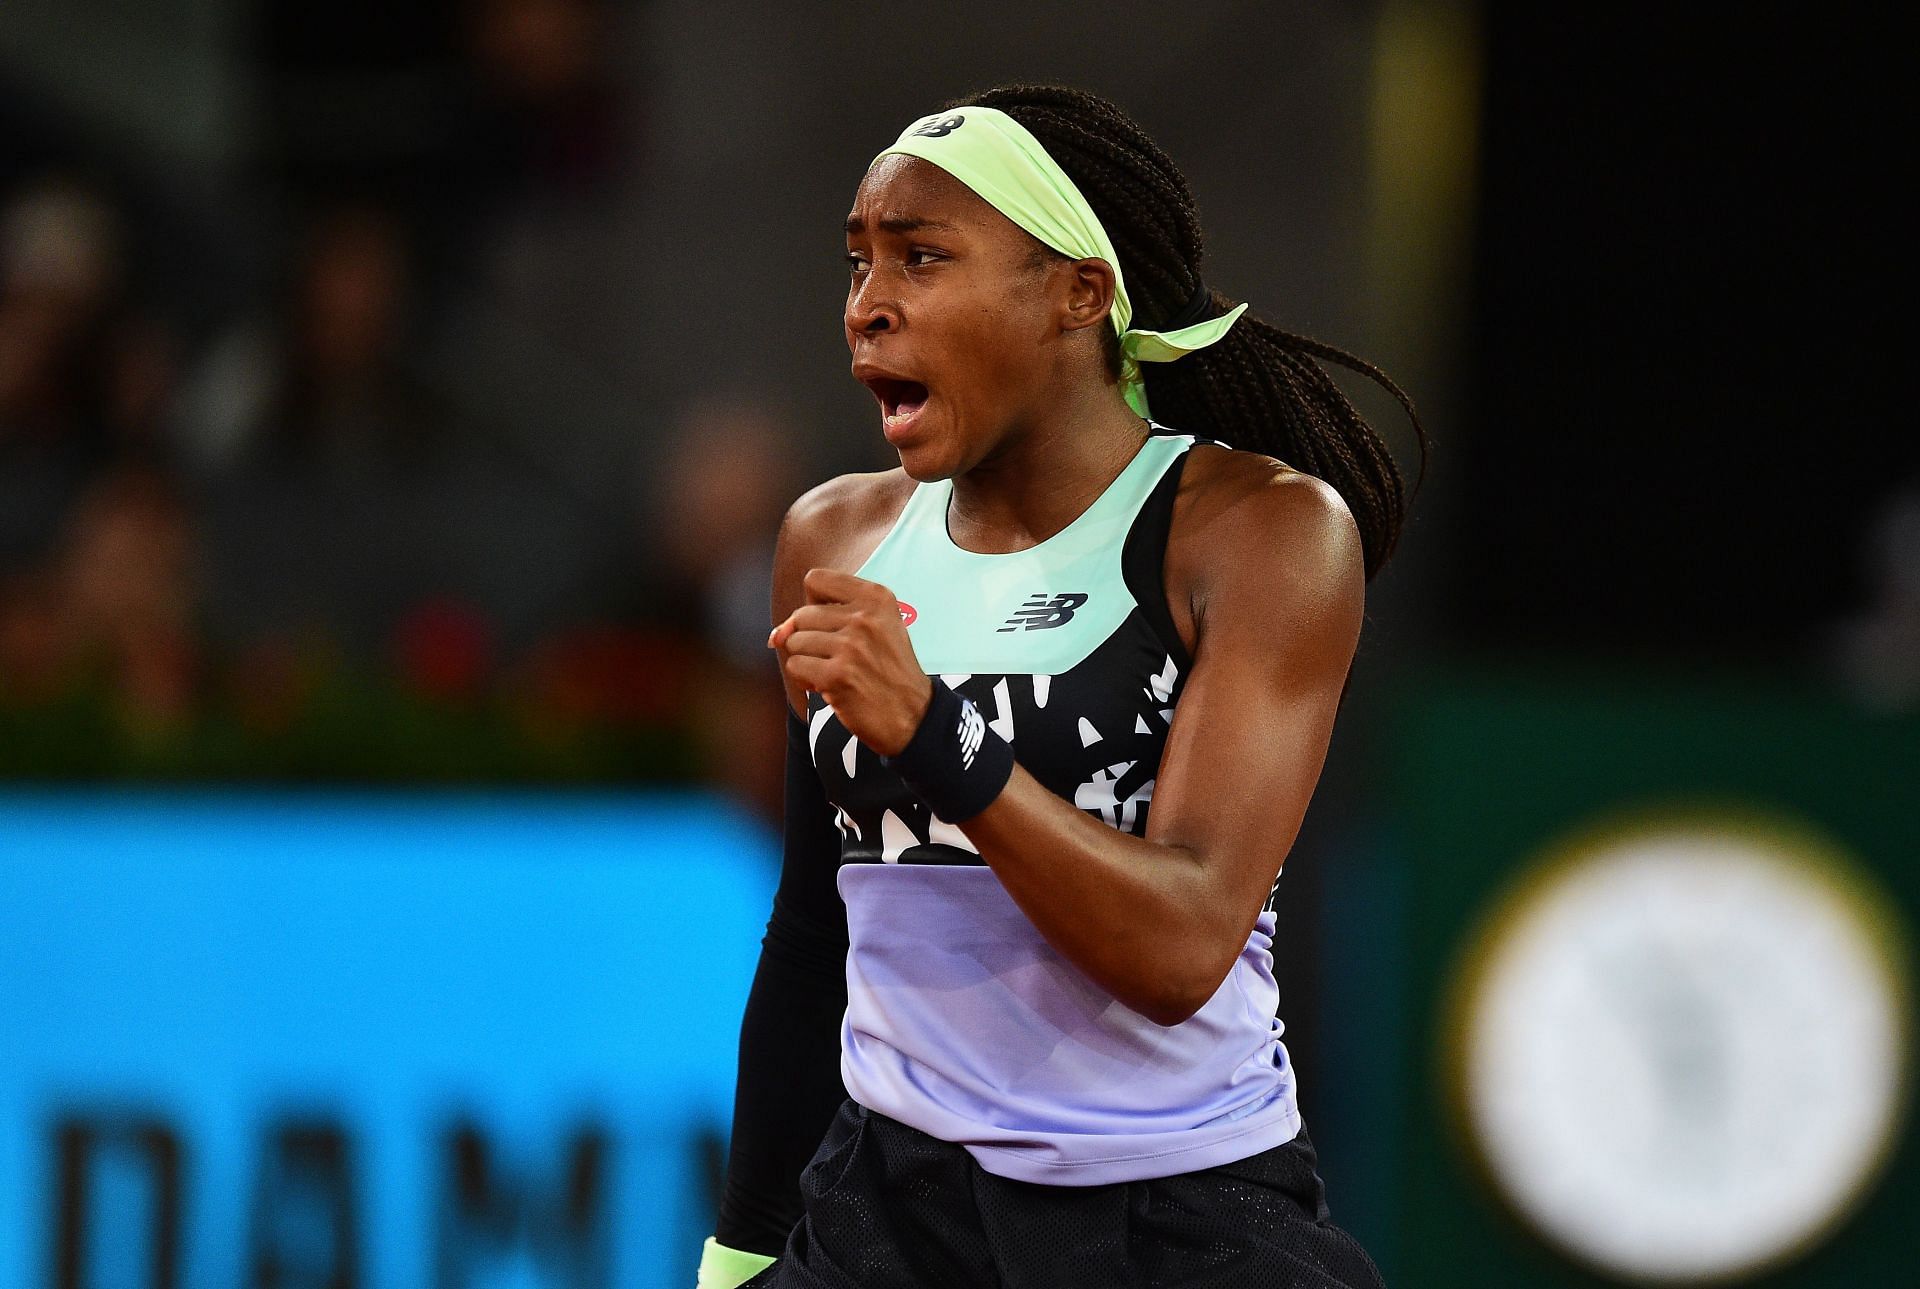 Coco Gauff will be keen to start off her Italian Open campaign strongly.